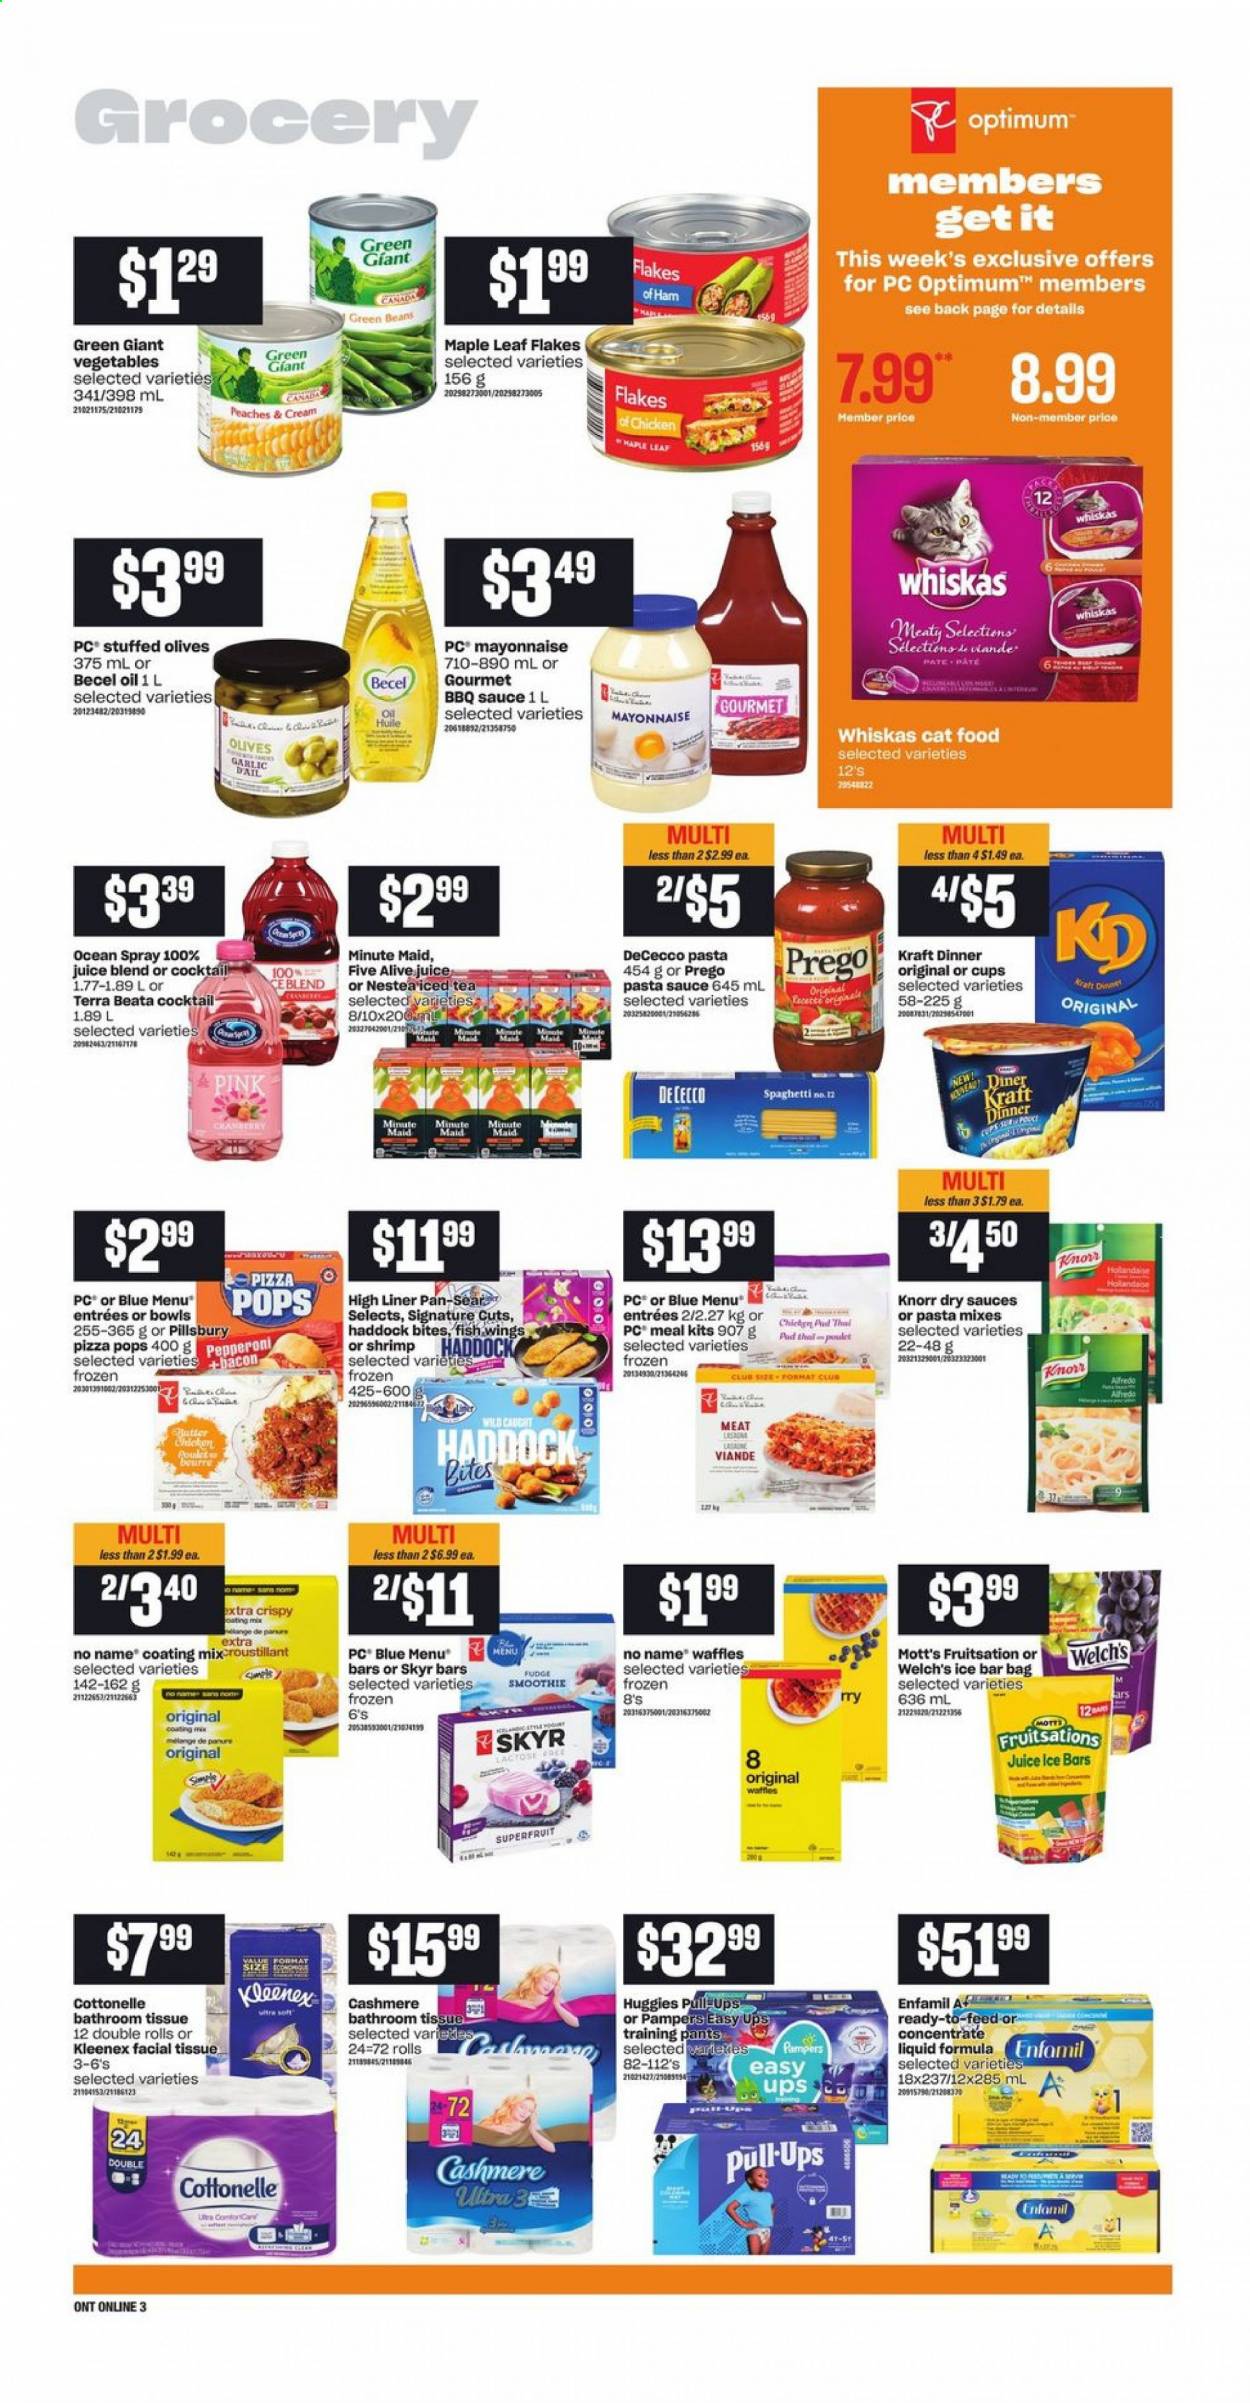 thumbnail - Independent Flyer - July 15, 2021 - July 21, 2021 - Sales products - waffles, beans, garlic, green beans, peaches, Welch's, Mott's, haddock, fish, shrimps, No Name, spaghetti, pizza, pasta sauce, Pillsbury, Kraft®, ham, mayonnaise, fudge, BBQ sauce, oil, juice, ice tea, fruit punch, smoothie, Enfamil, pants, baby pants, bath tissue, Cottonelle, Kleenex, XTRA, bag, pan, cup, animal food, cat food, Optimum, Knorr, Huggies, Pampers, olives. Page 7.